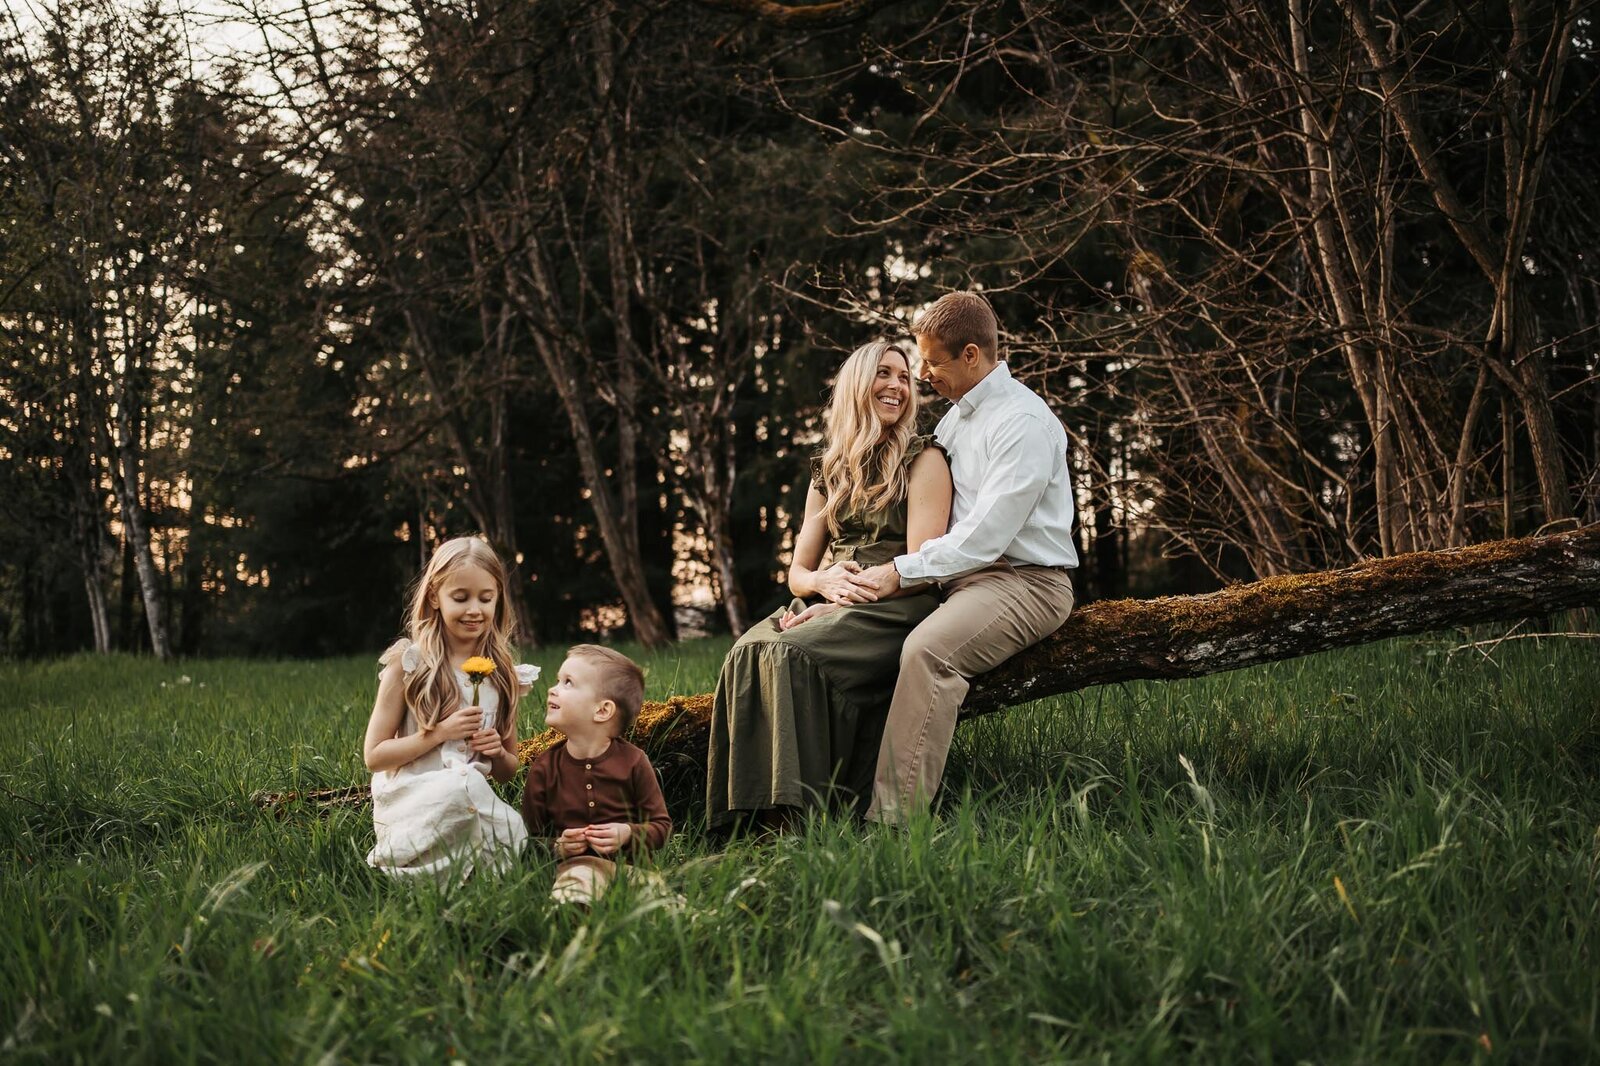 Sister and bother playing with wild flower while their parents sitting on a log and looking at each other